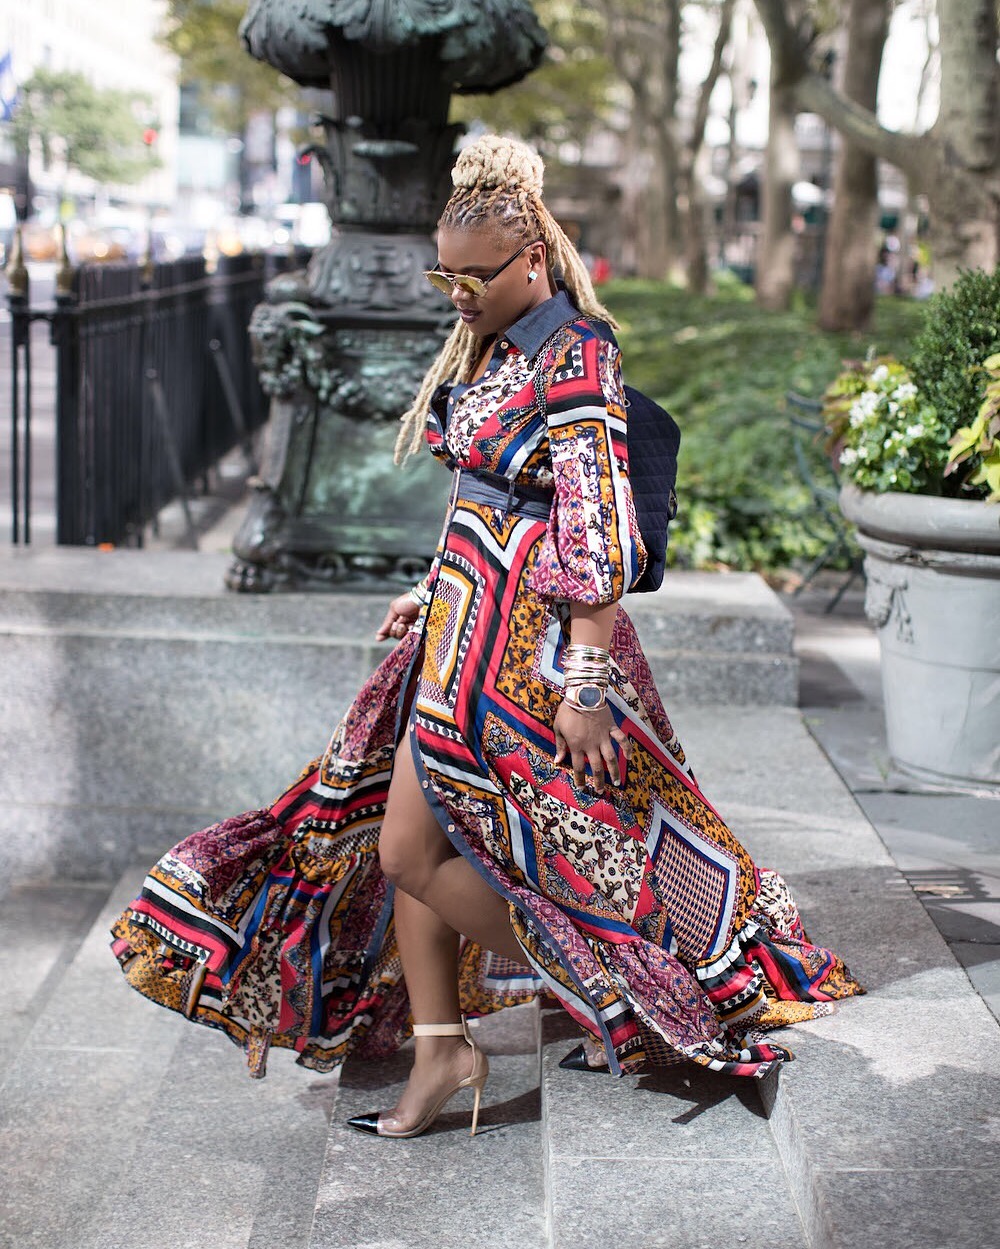 Talking Pride and Self Expression with South African Superstar Boity Thulo in a Dez Deme Printed Dress